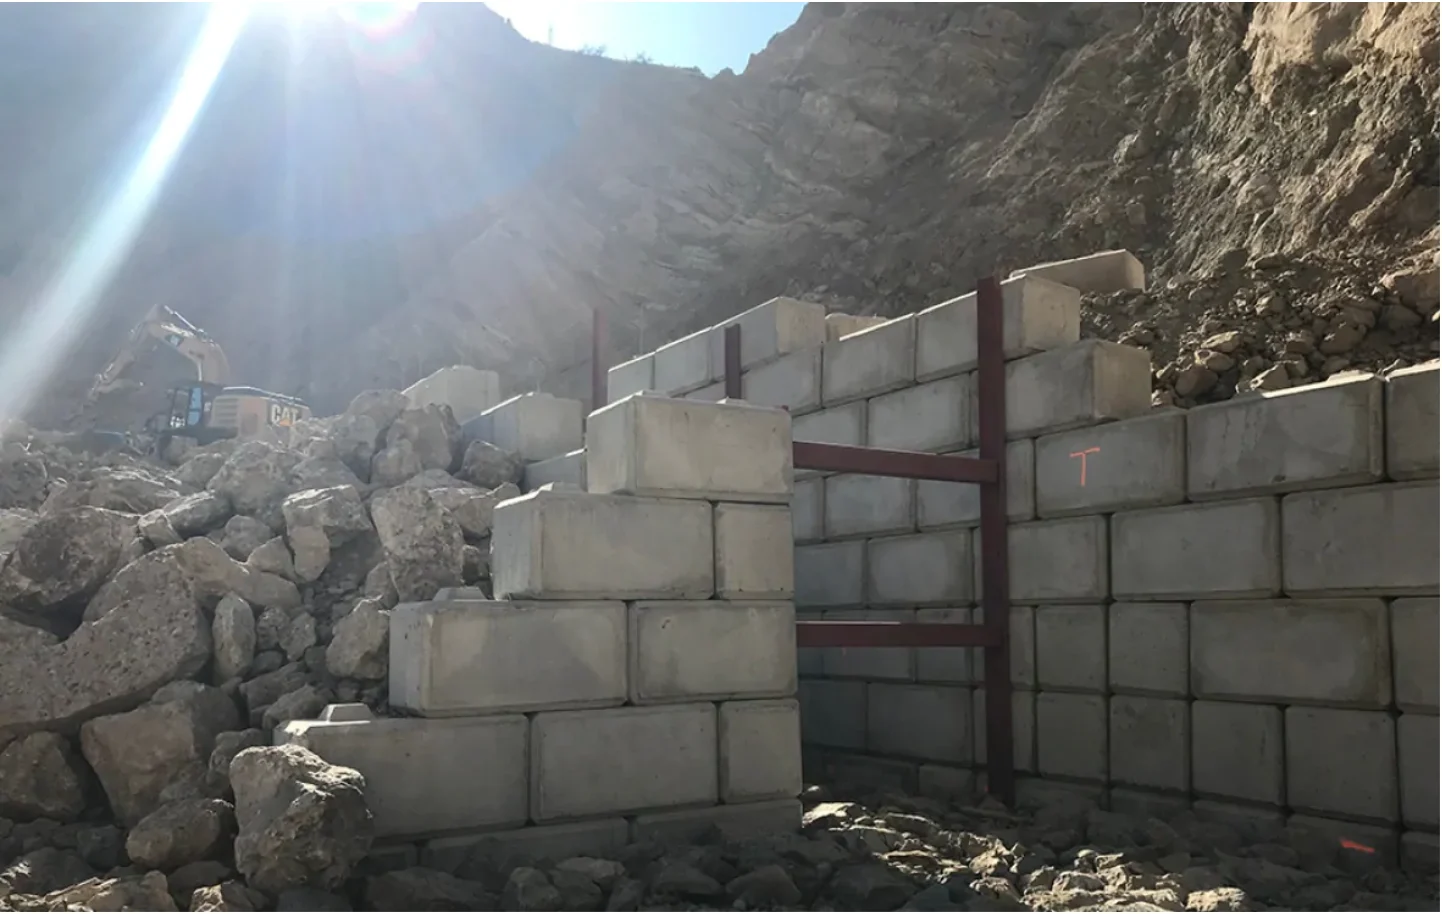 Over 500 concretes blocks are being used to construct a fish ladder to deliver spawning salmon to the holding pool where they will sorted and then put in the 'salmon cannon.' (Fisheries and Oceans Canada)